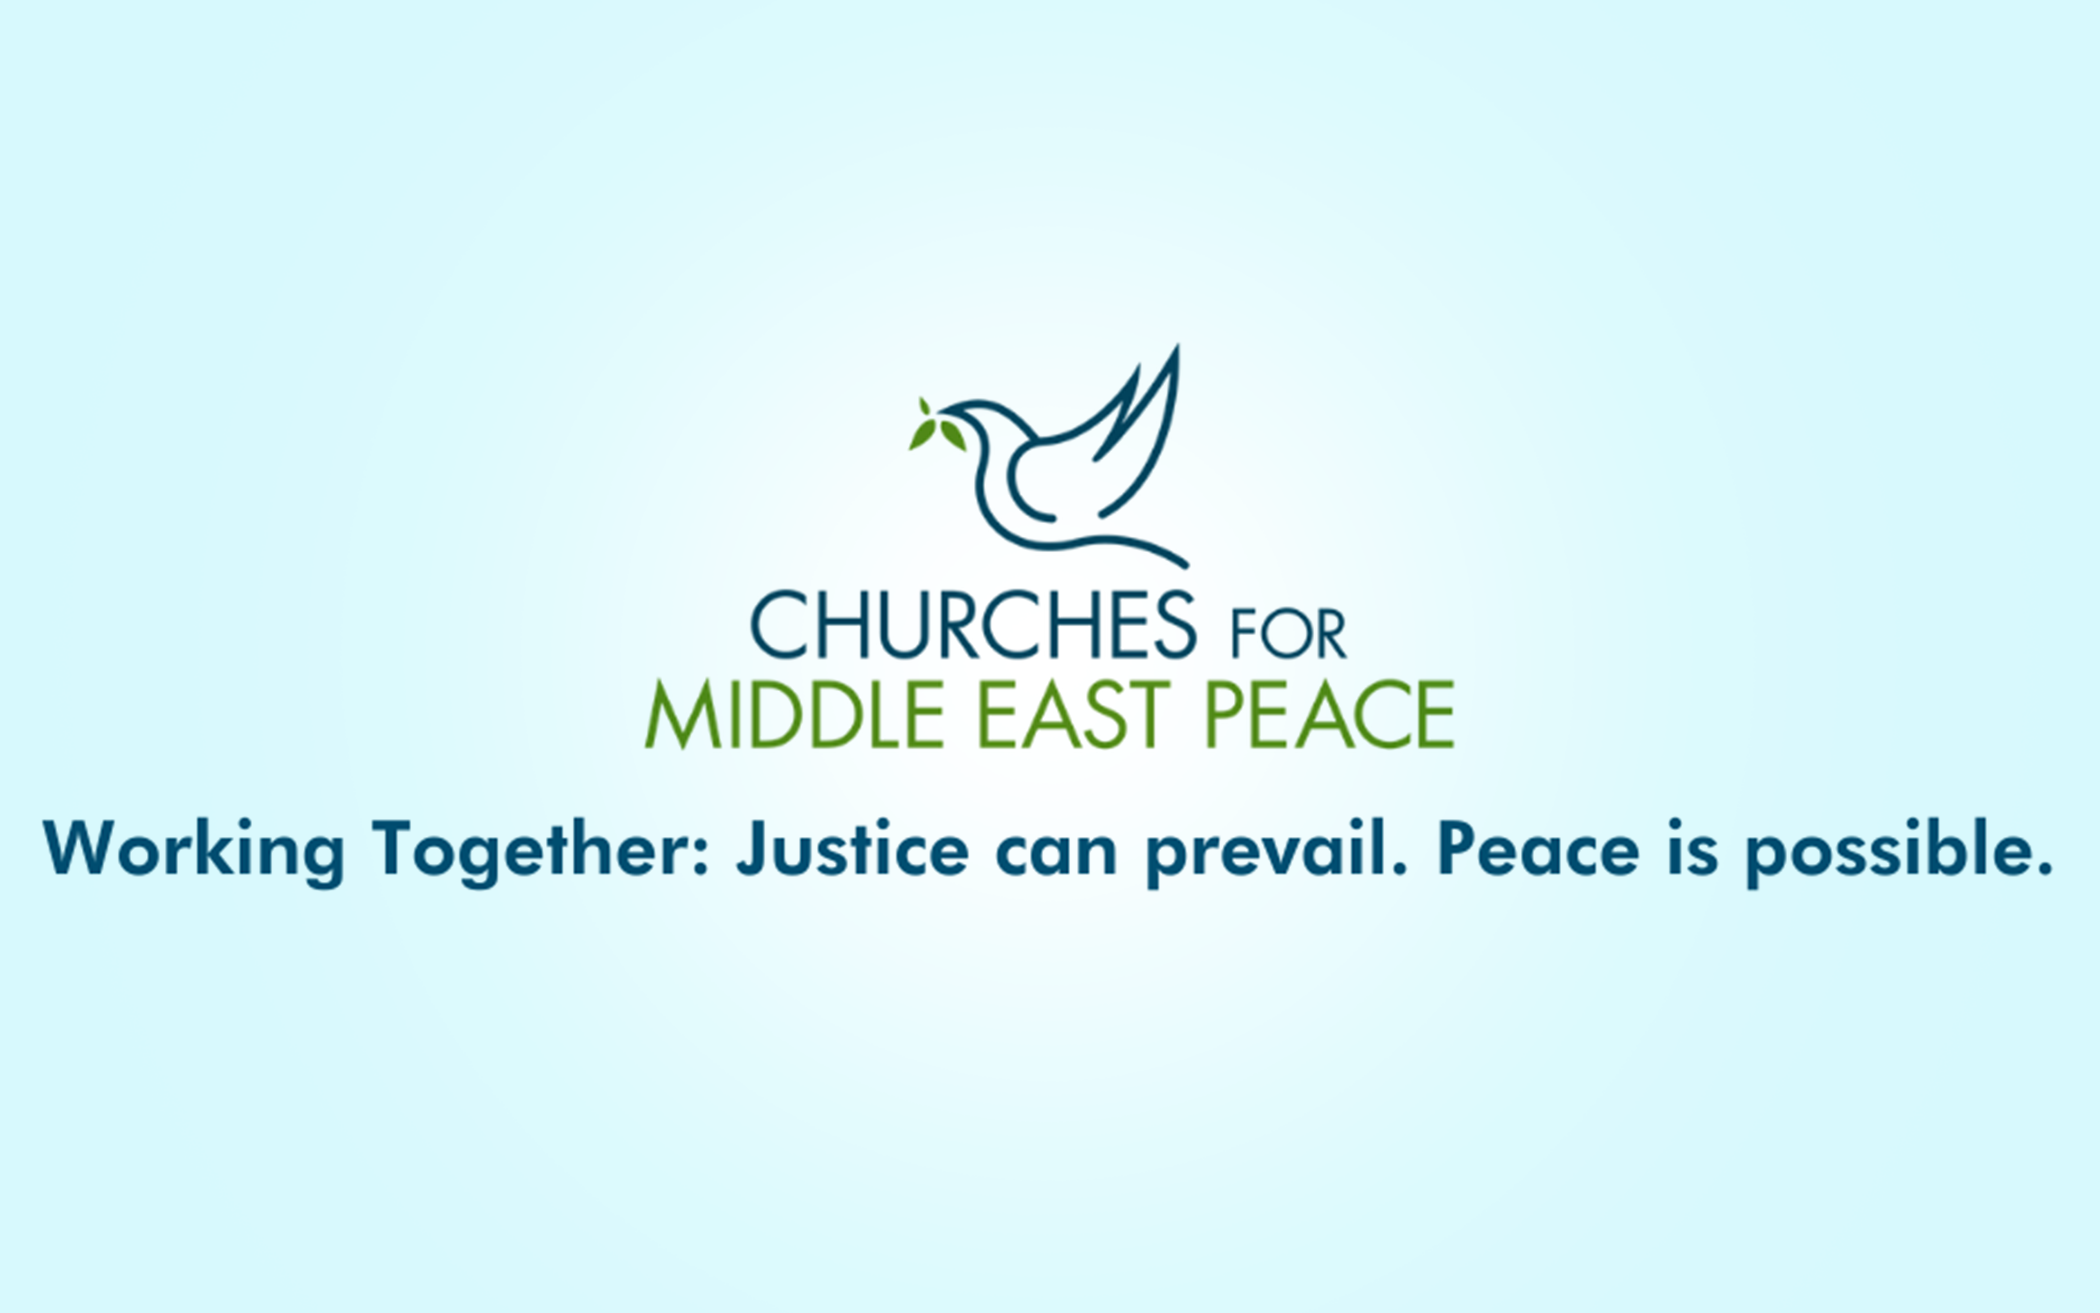 CRCNA Leaders Among Those to Sign Churches for Middle East Peace Advocacy Letter